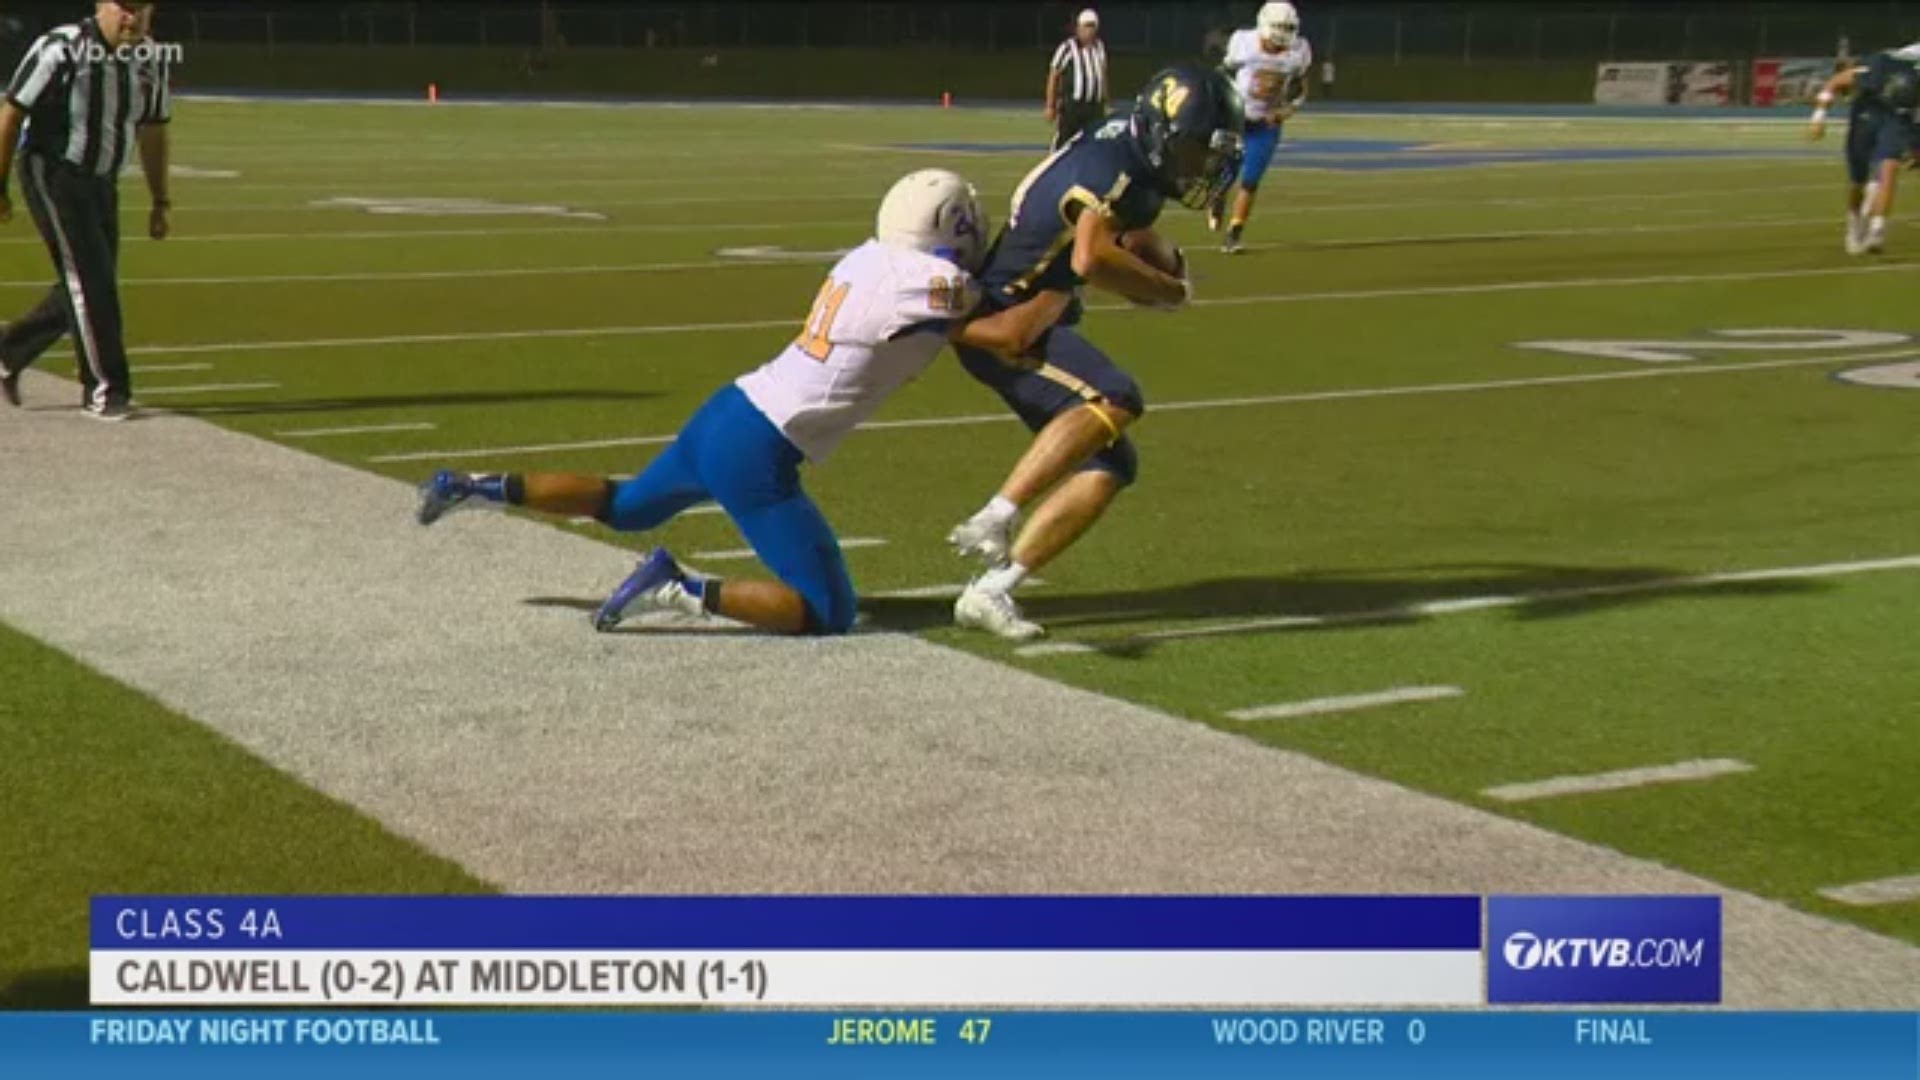 In this Class 4A week three matchup, the Caldwell Cougars are still searching for their first win of the season as they take on the Middleton Vikings. However, the Cougars would be shut out and lose to the Vikings, 54-0.